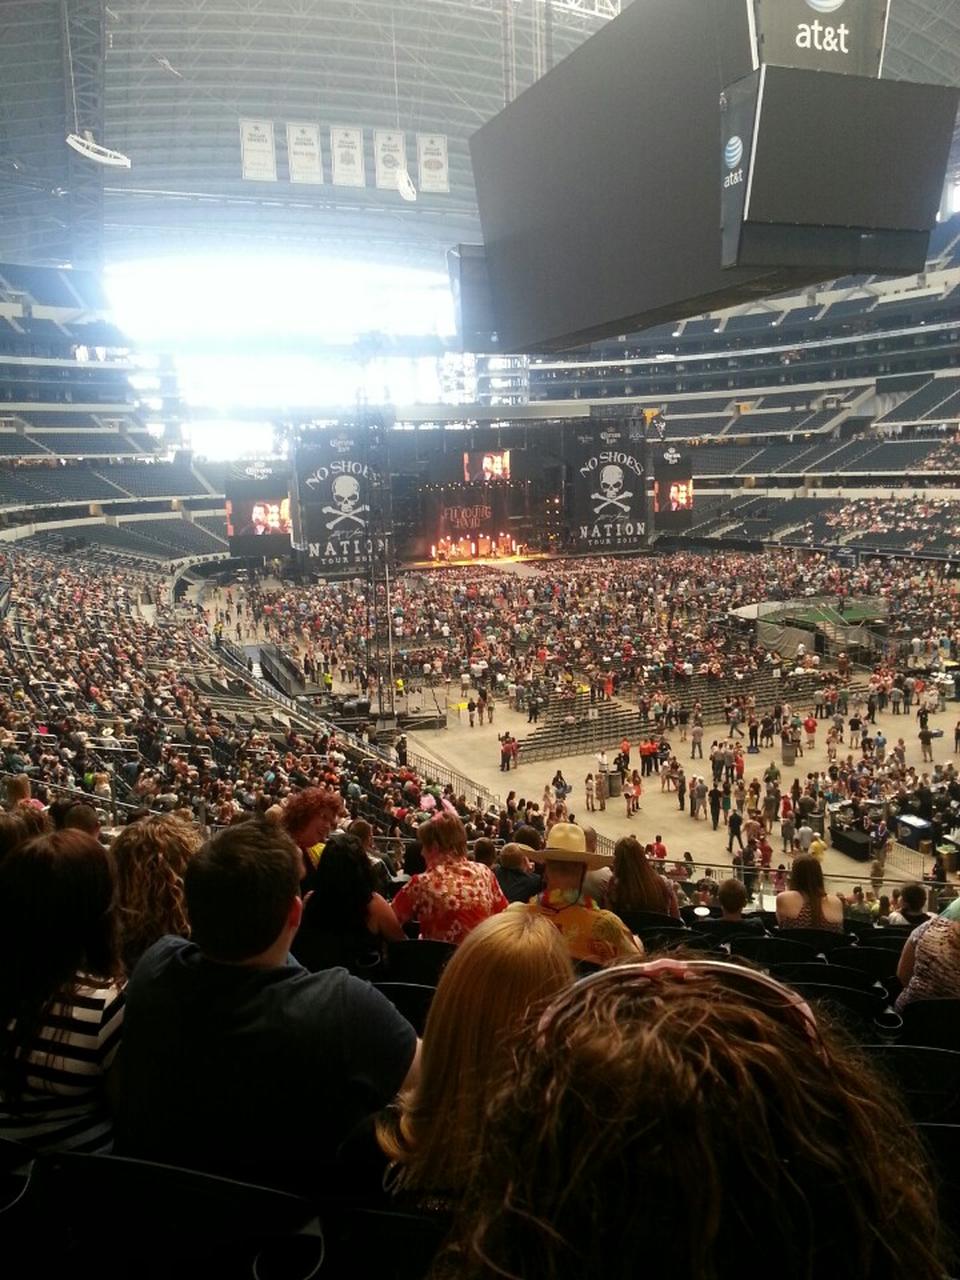 section 227, row 9 seat view  for concert - at&t stadium (cowboys stadium)